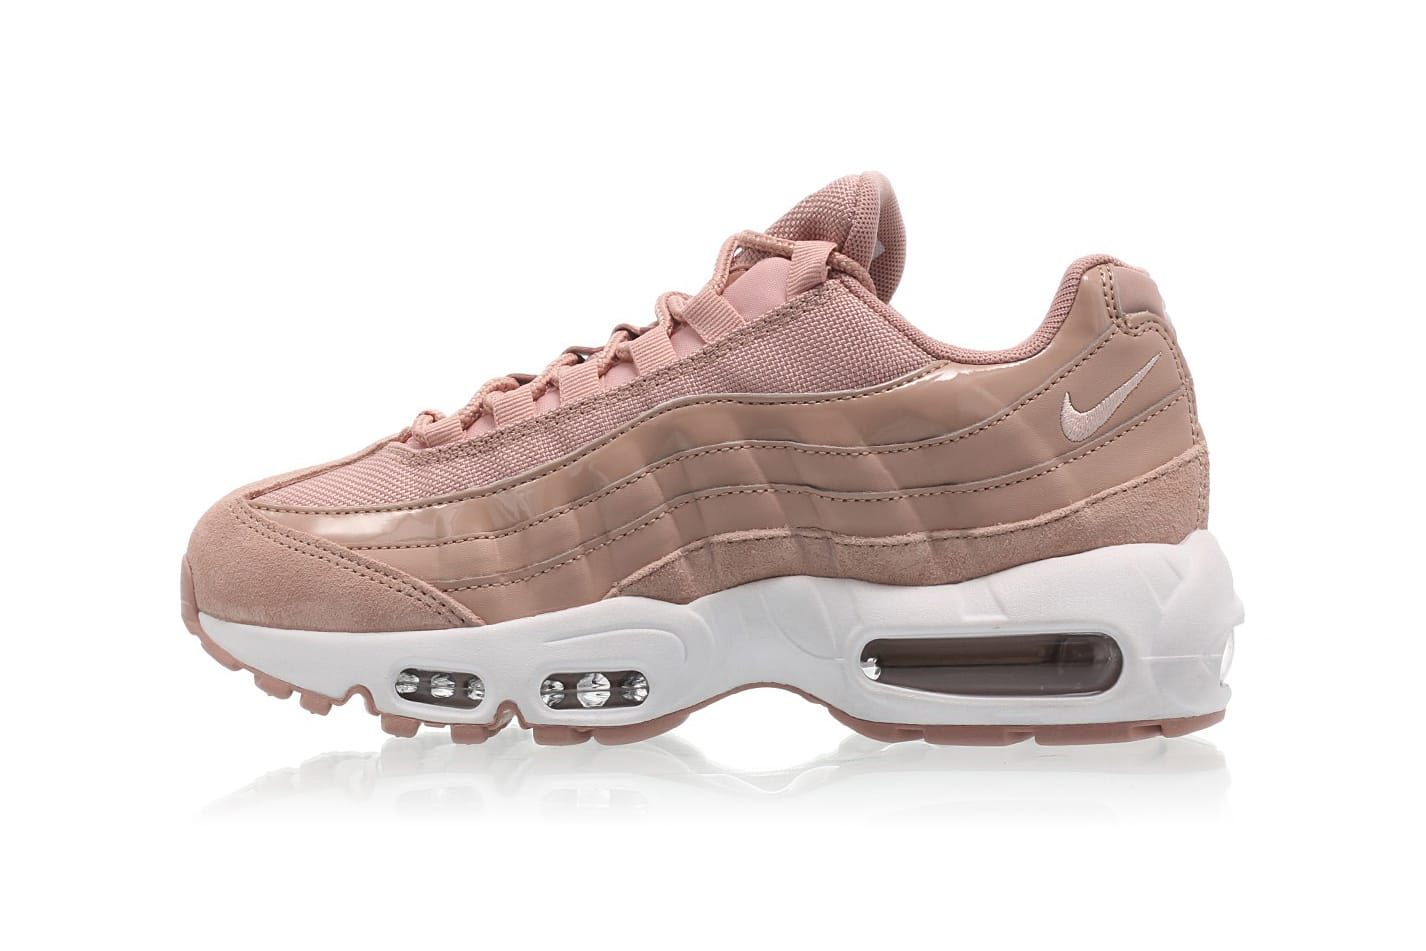 Nike Air Max 95 in Particle Pink | HYPEBAE